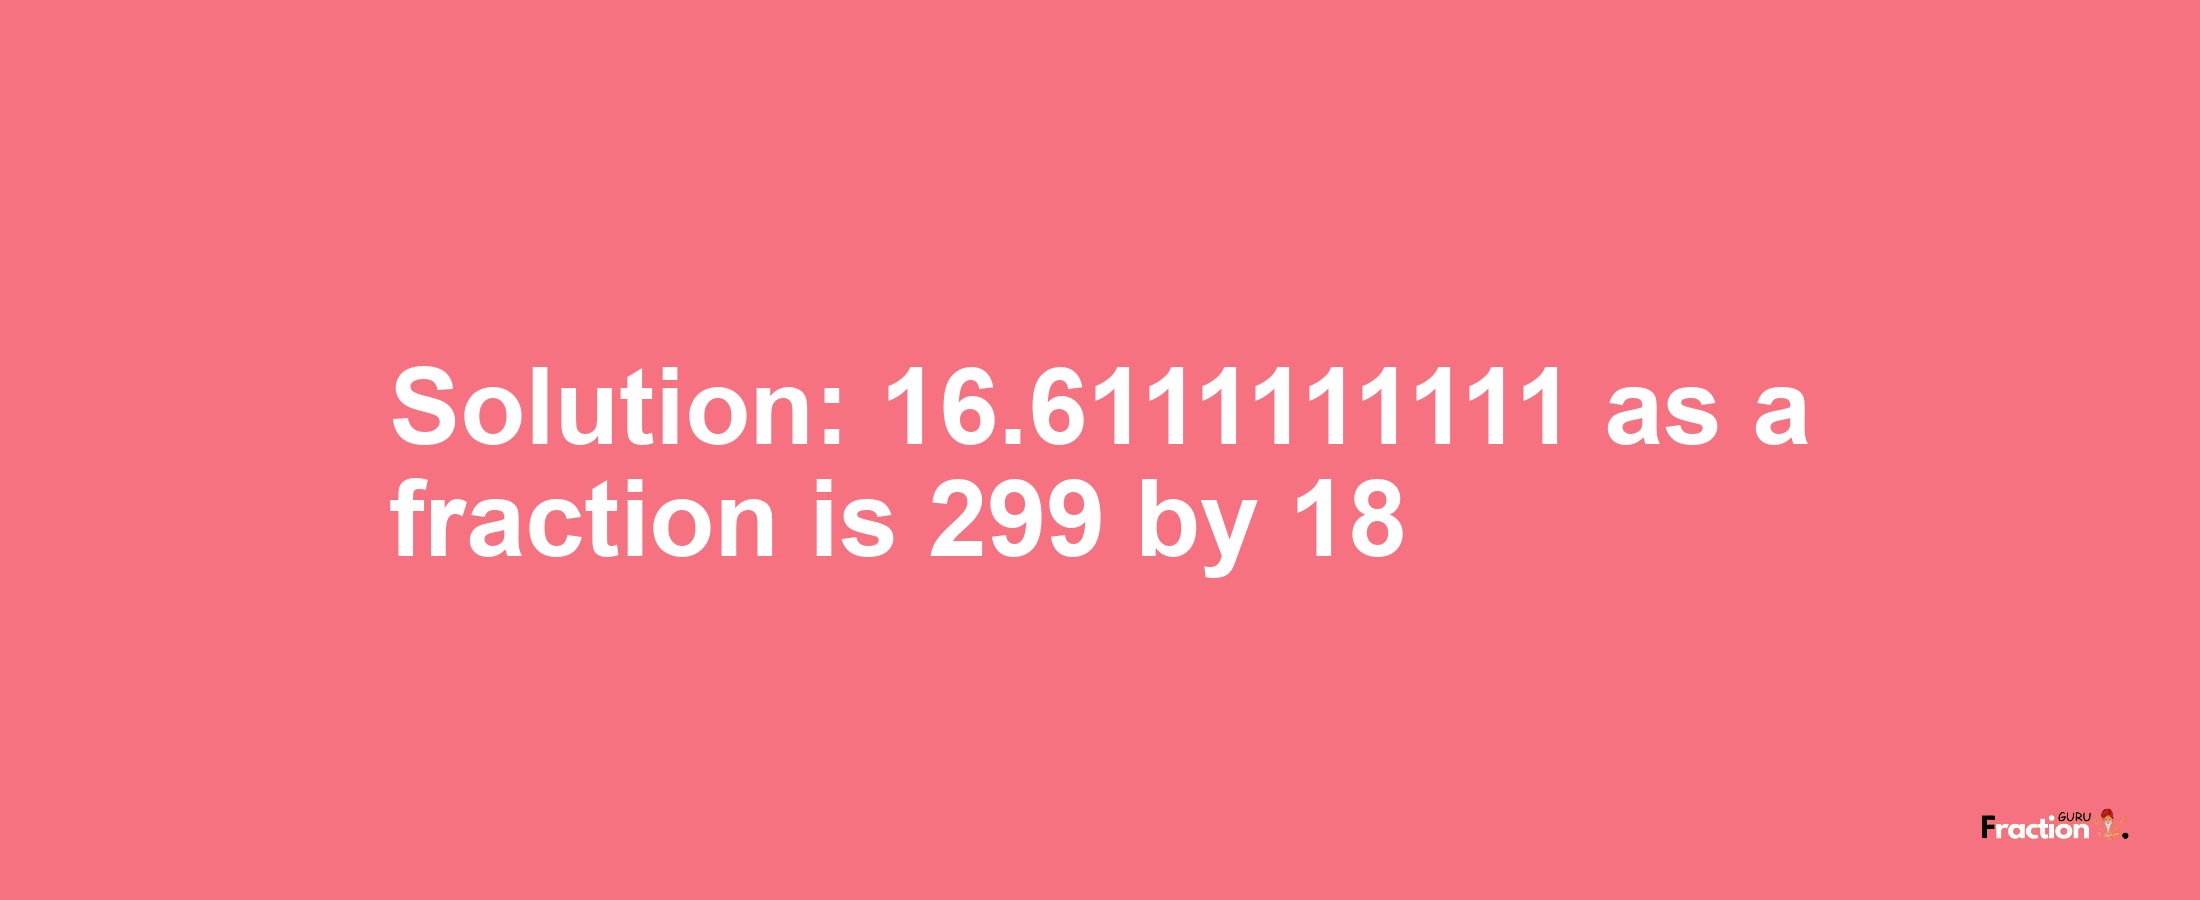 Solution:16.6111111111 as a fraction is 299/18